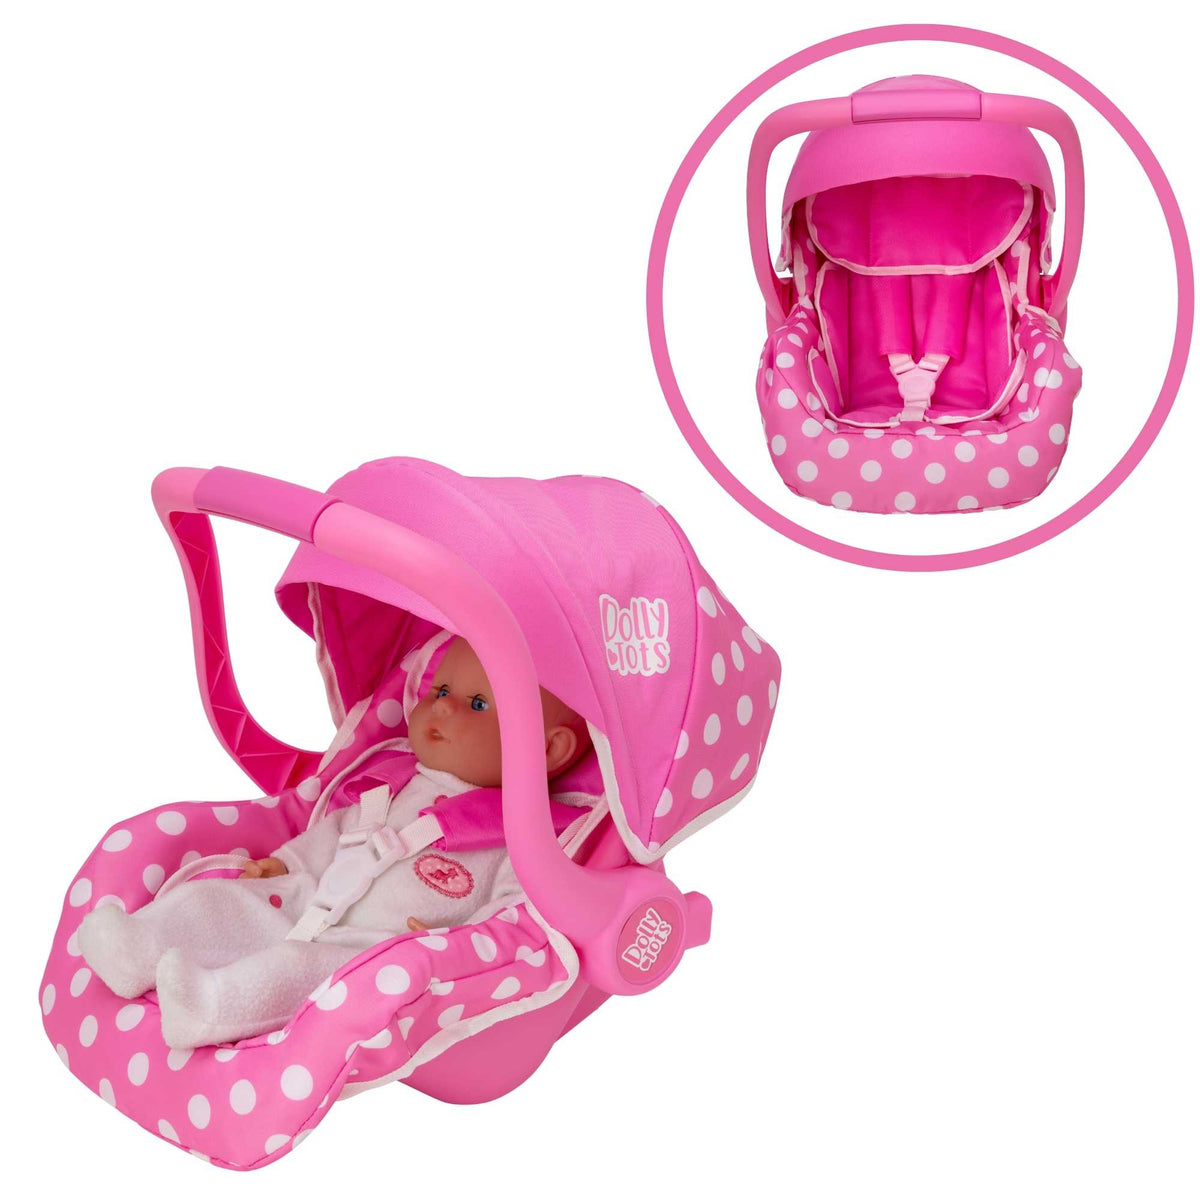 Dolls Car Seat, Dolls Prams &amp; Accessories, Dolly Tots Playset, Childrens Dolls Accessories, Childrens Car Seat, Pink Dolls Playsets